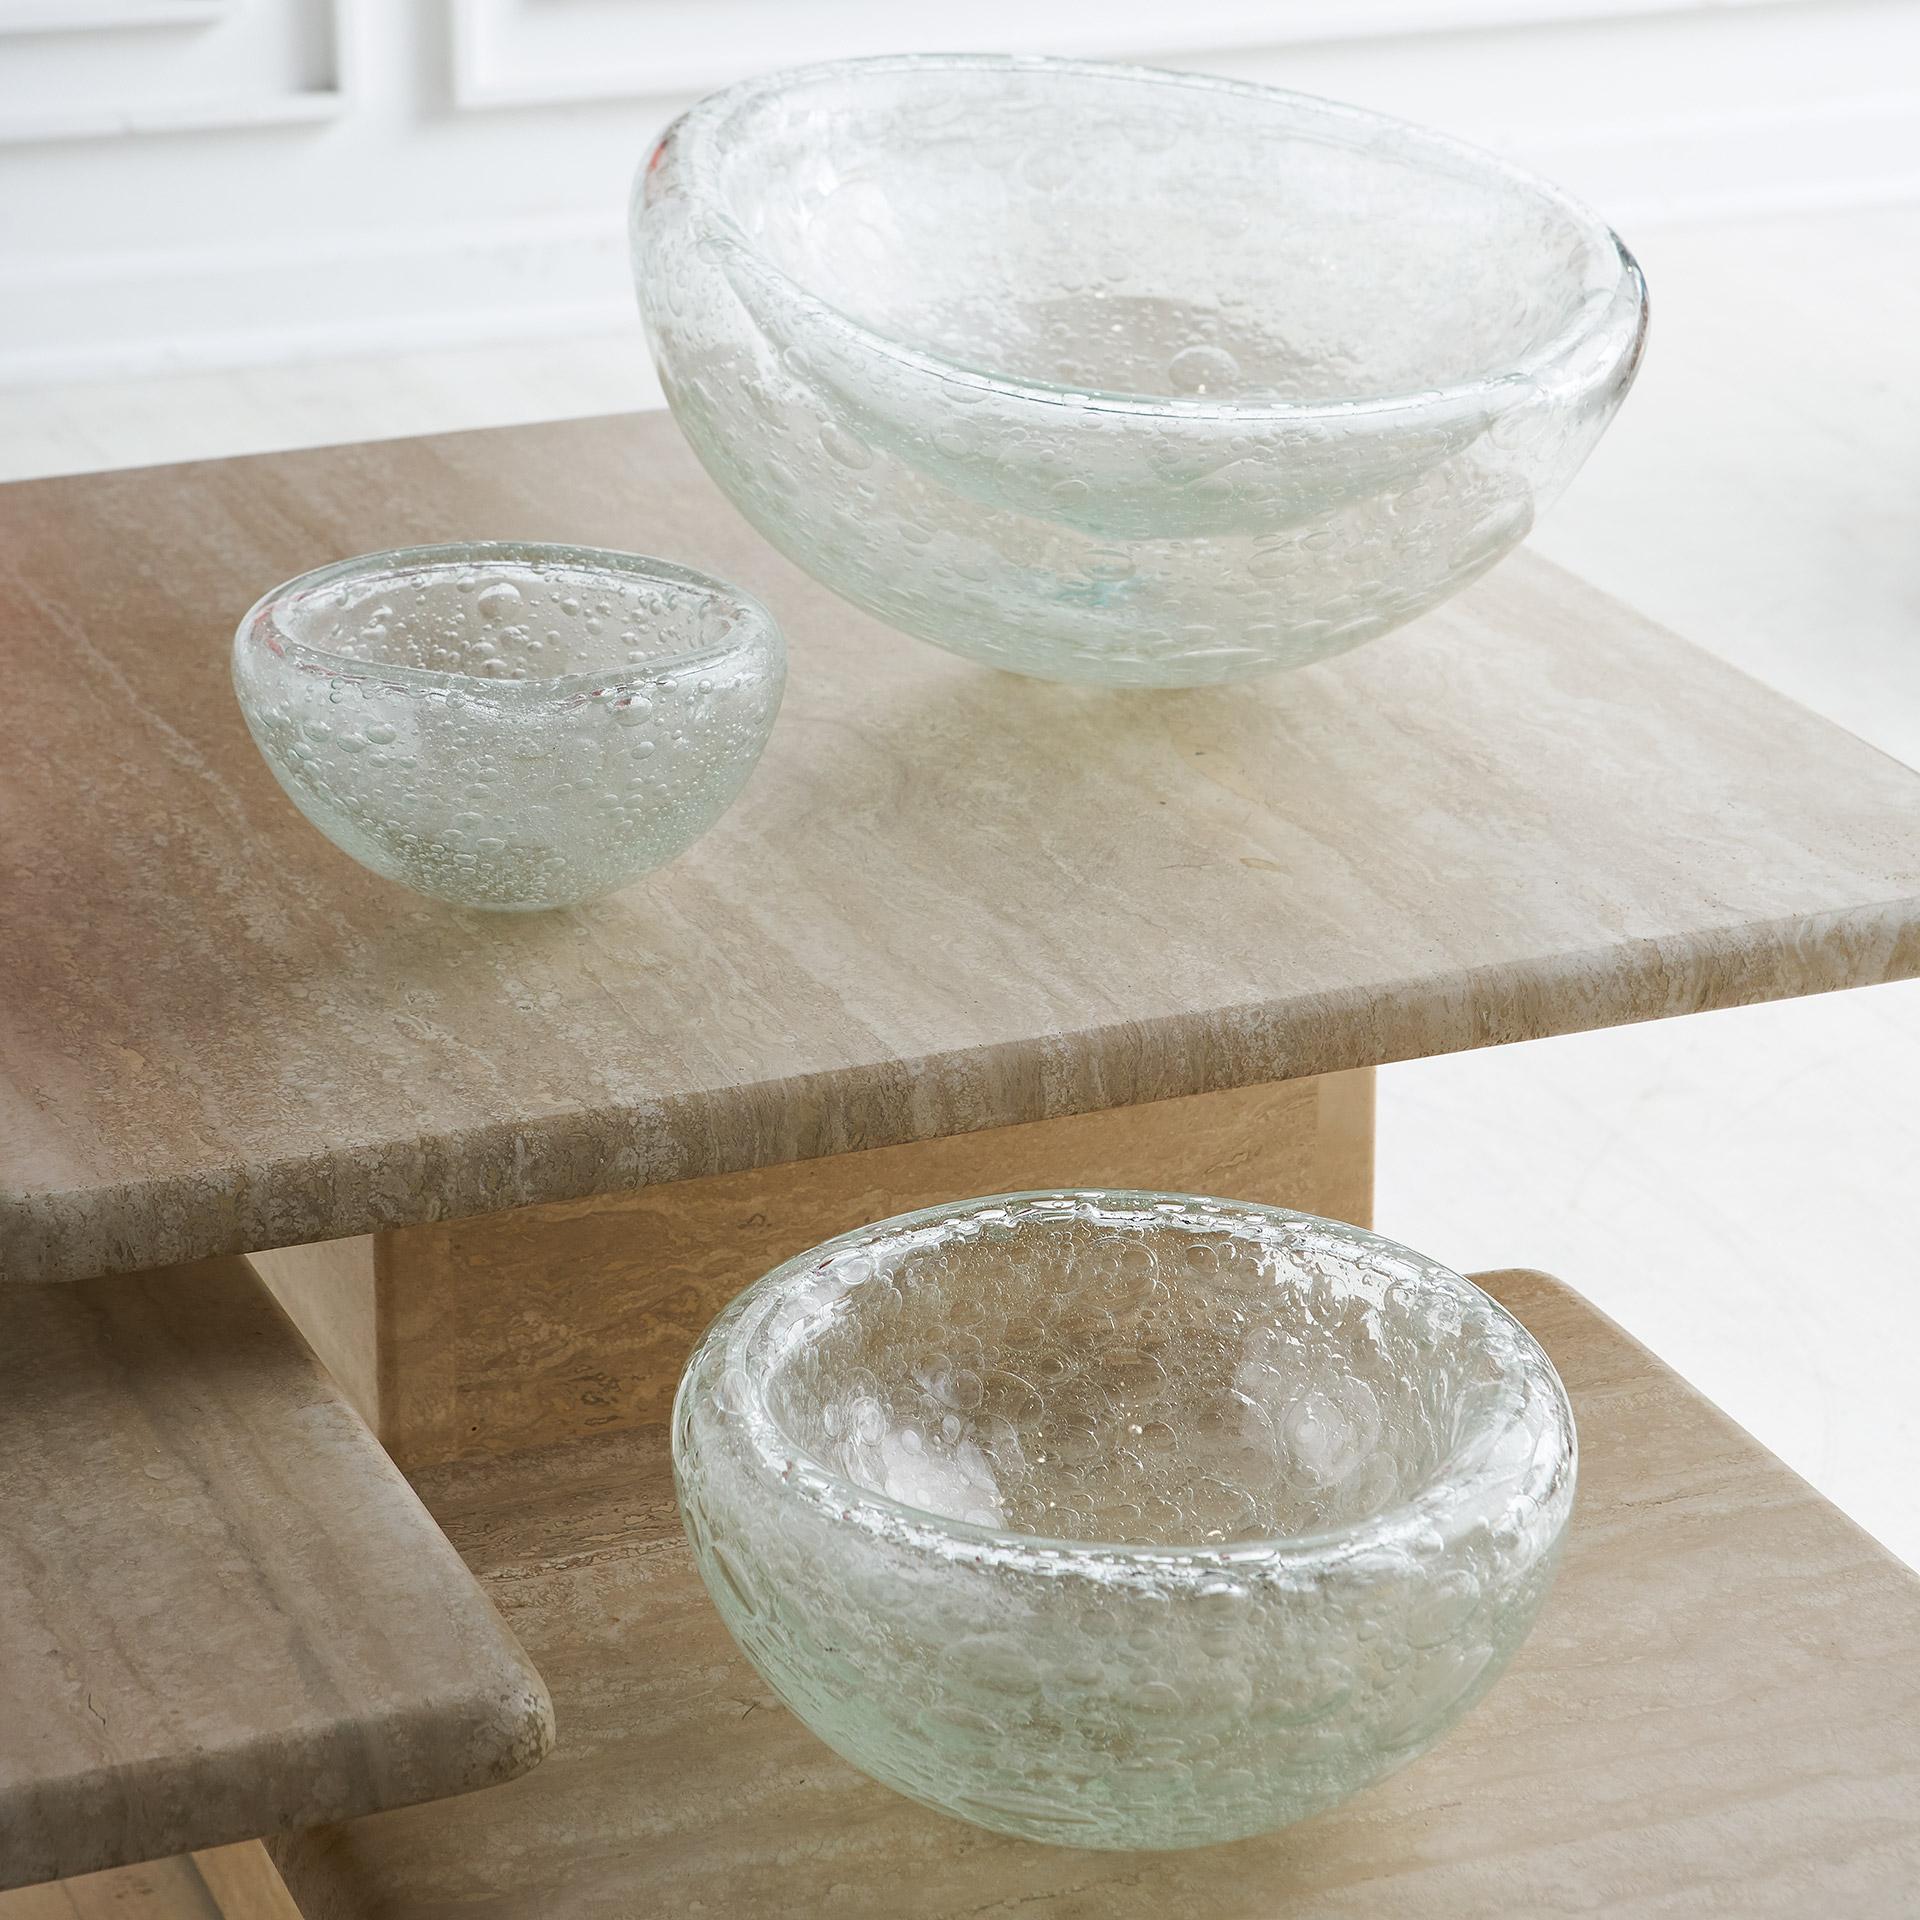 Wonderful hand blown glass bowls with delightful bubble effect. Sure to add a bit of delight to any tabletop. Each bowl is unique in overall shape and thickness.

Measures: Large: Approx 12.25